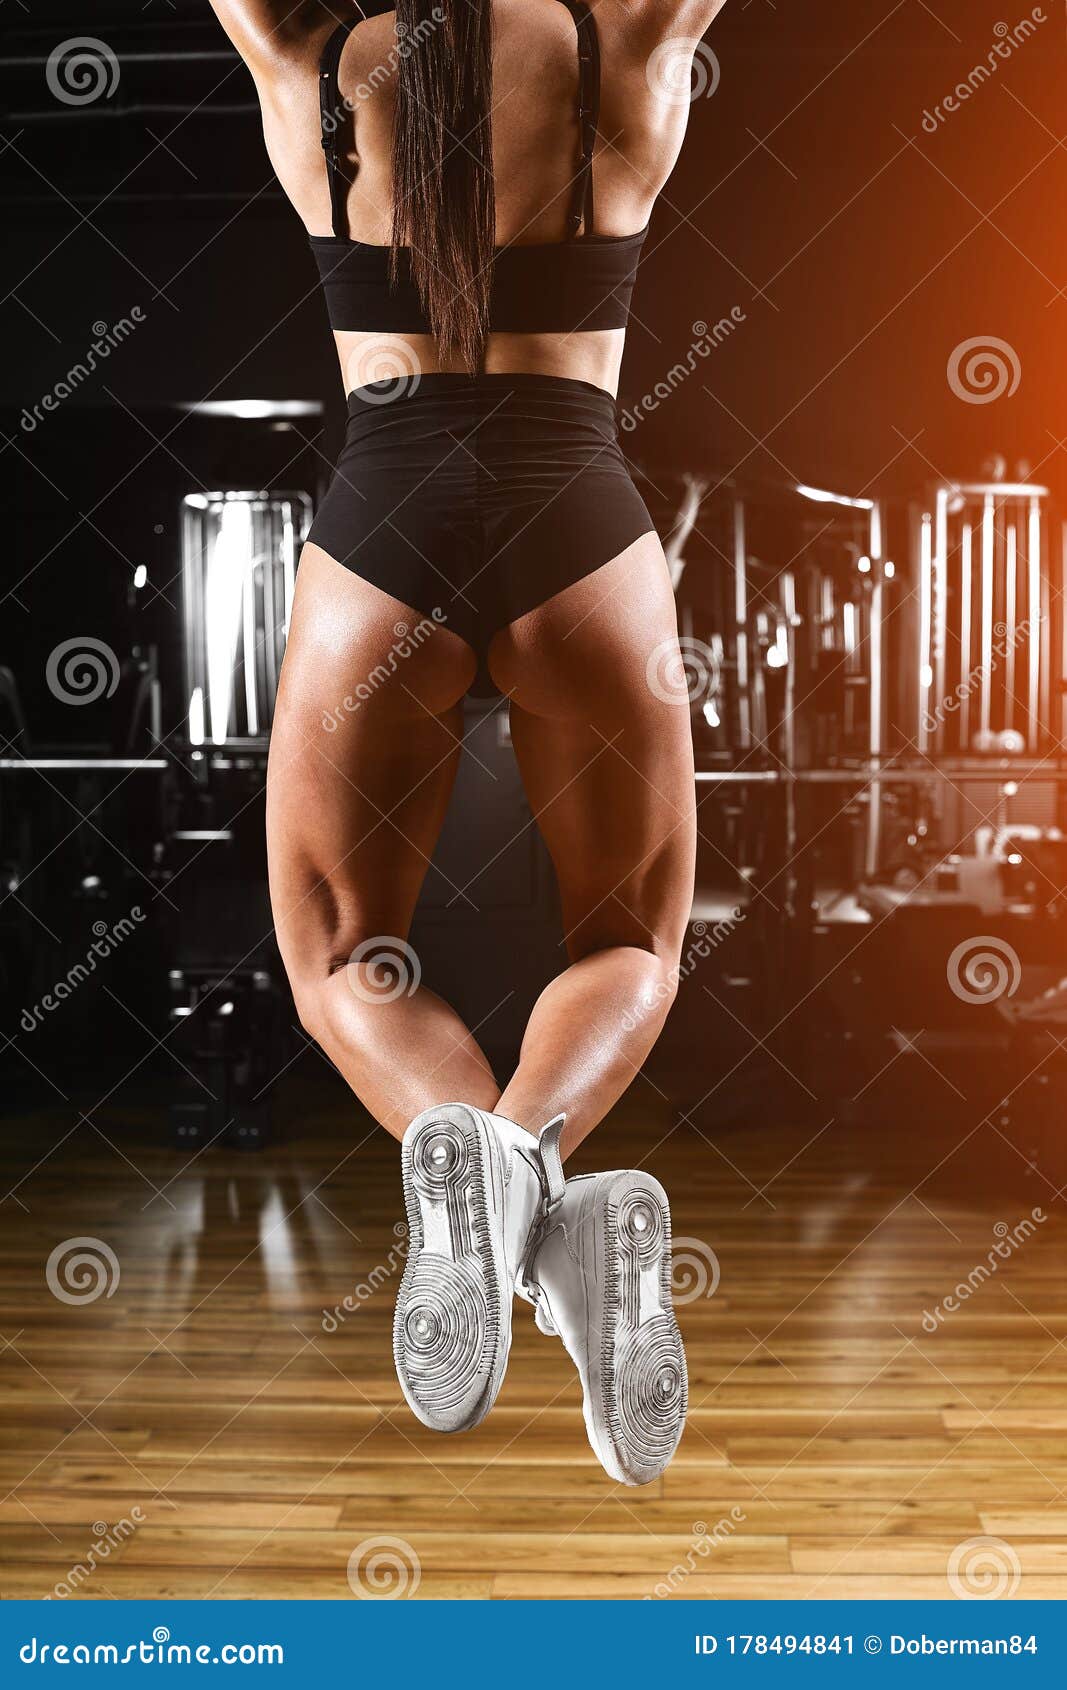 Sexy athletic girl working out in gym. Fitness woman doing exercise, sports  concept фотография Stock